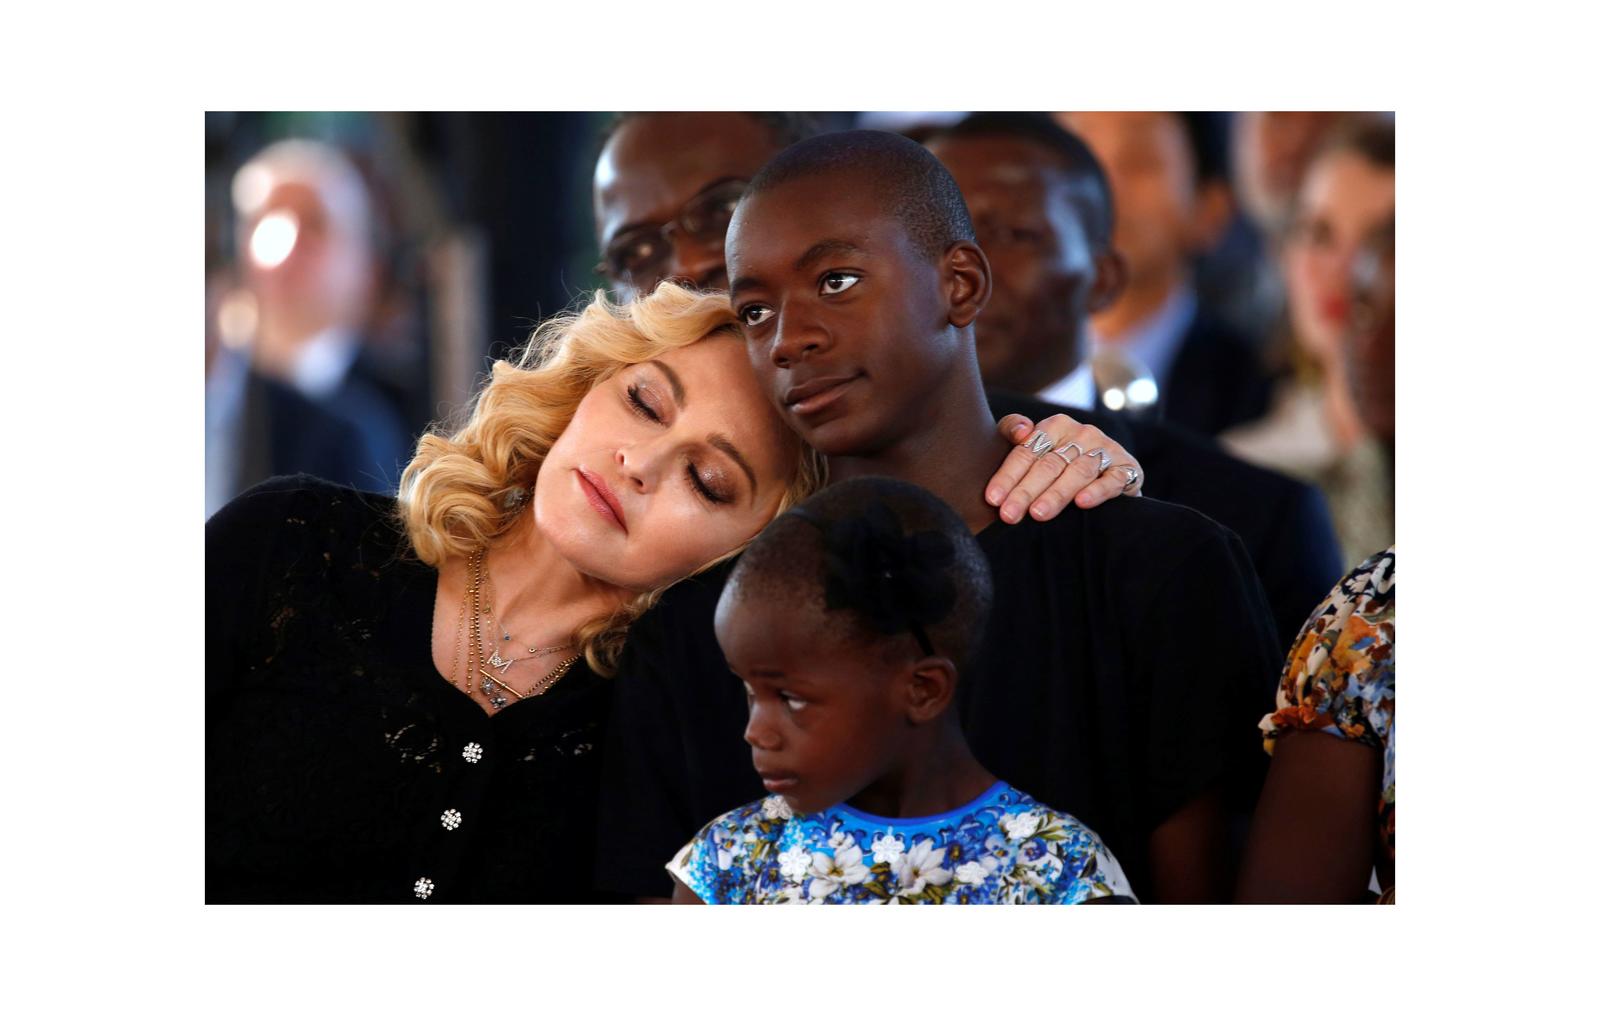 US singer Madonna embraces her son, David Banda ahead of the opening of the Mercy James hospital in Blantyre